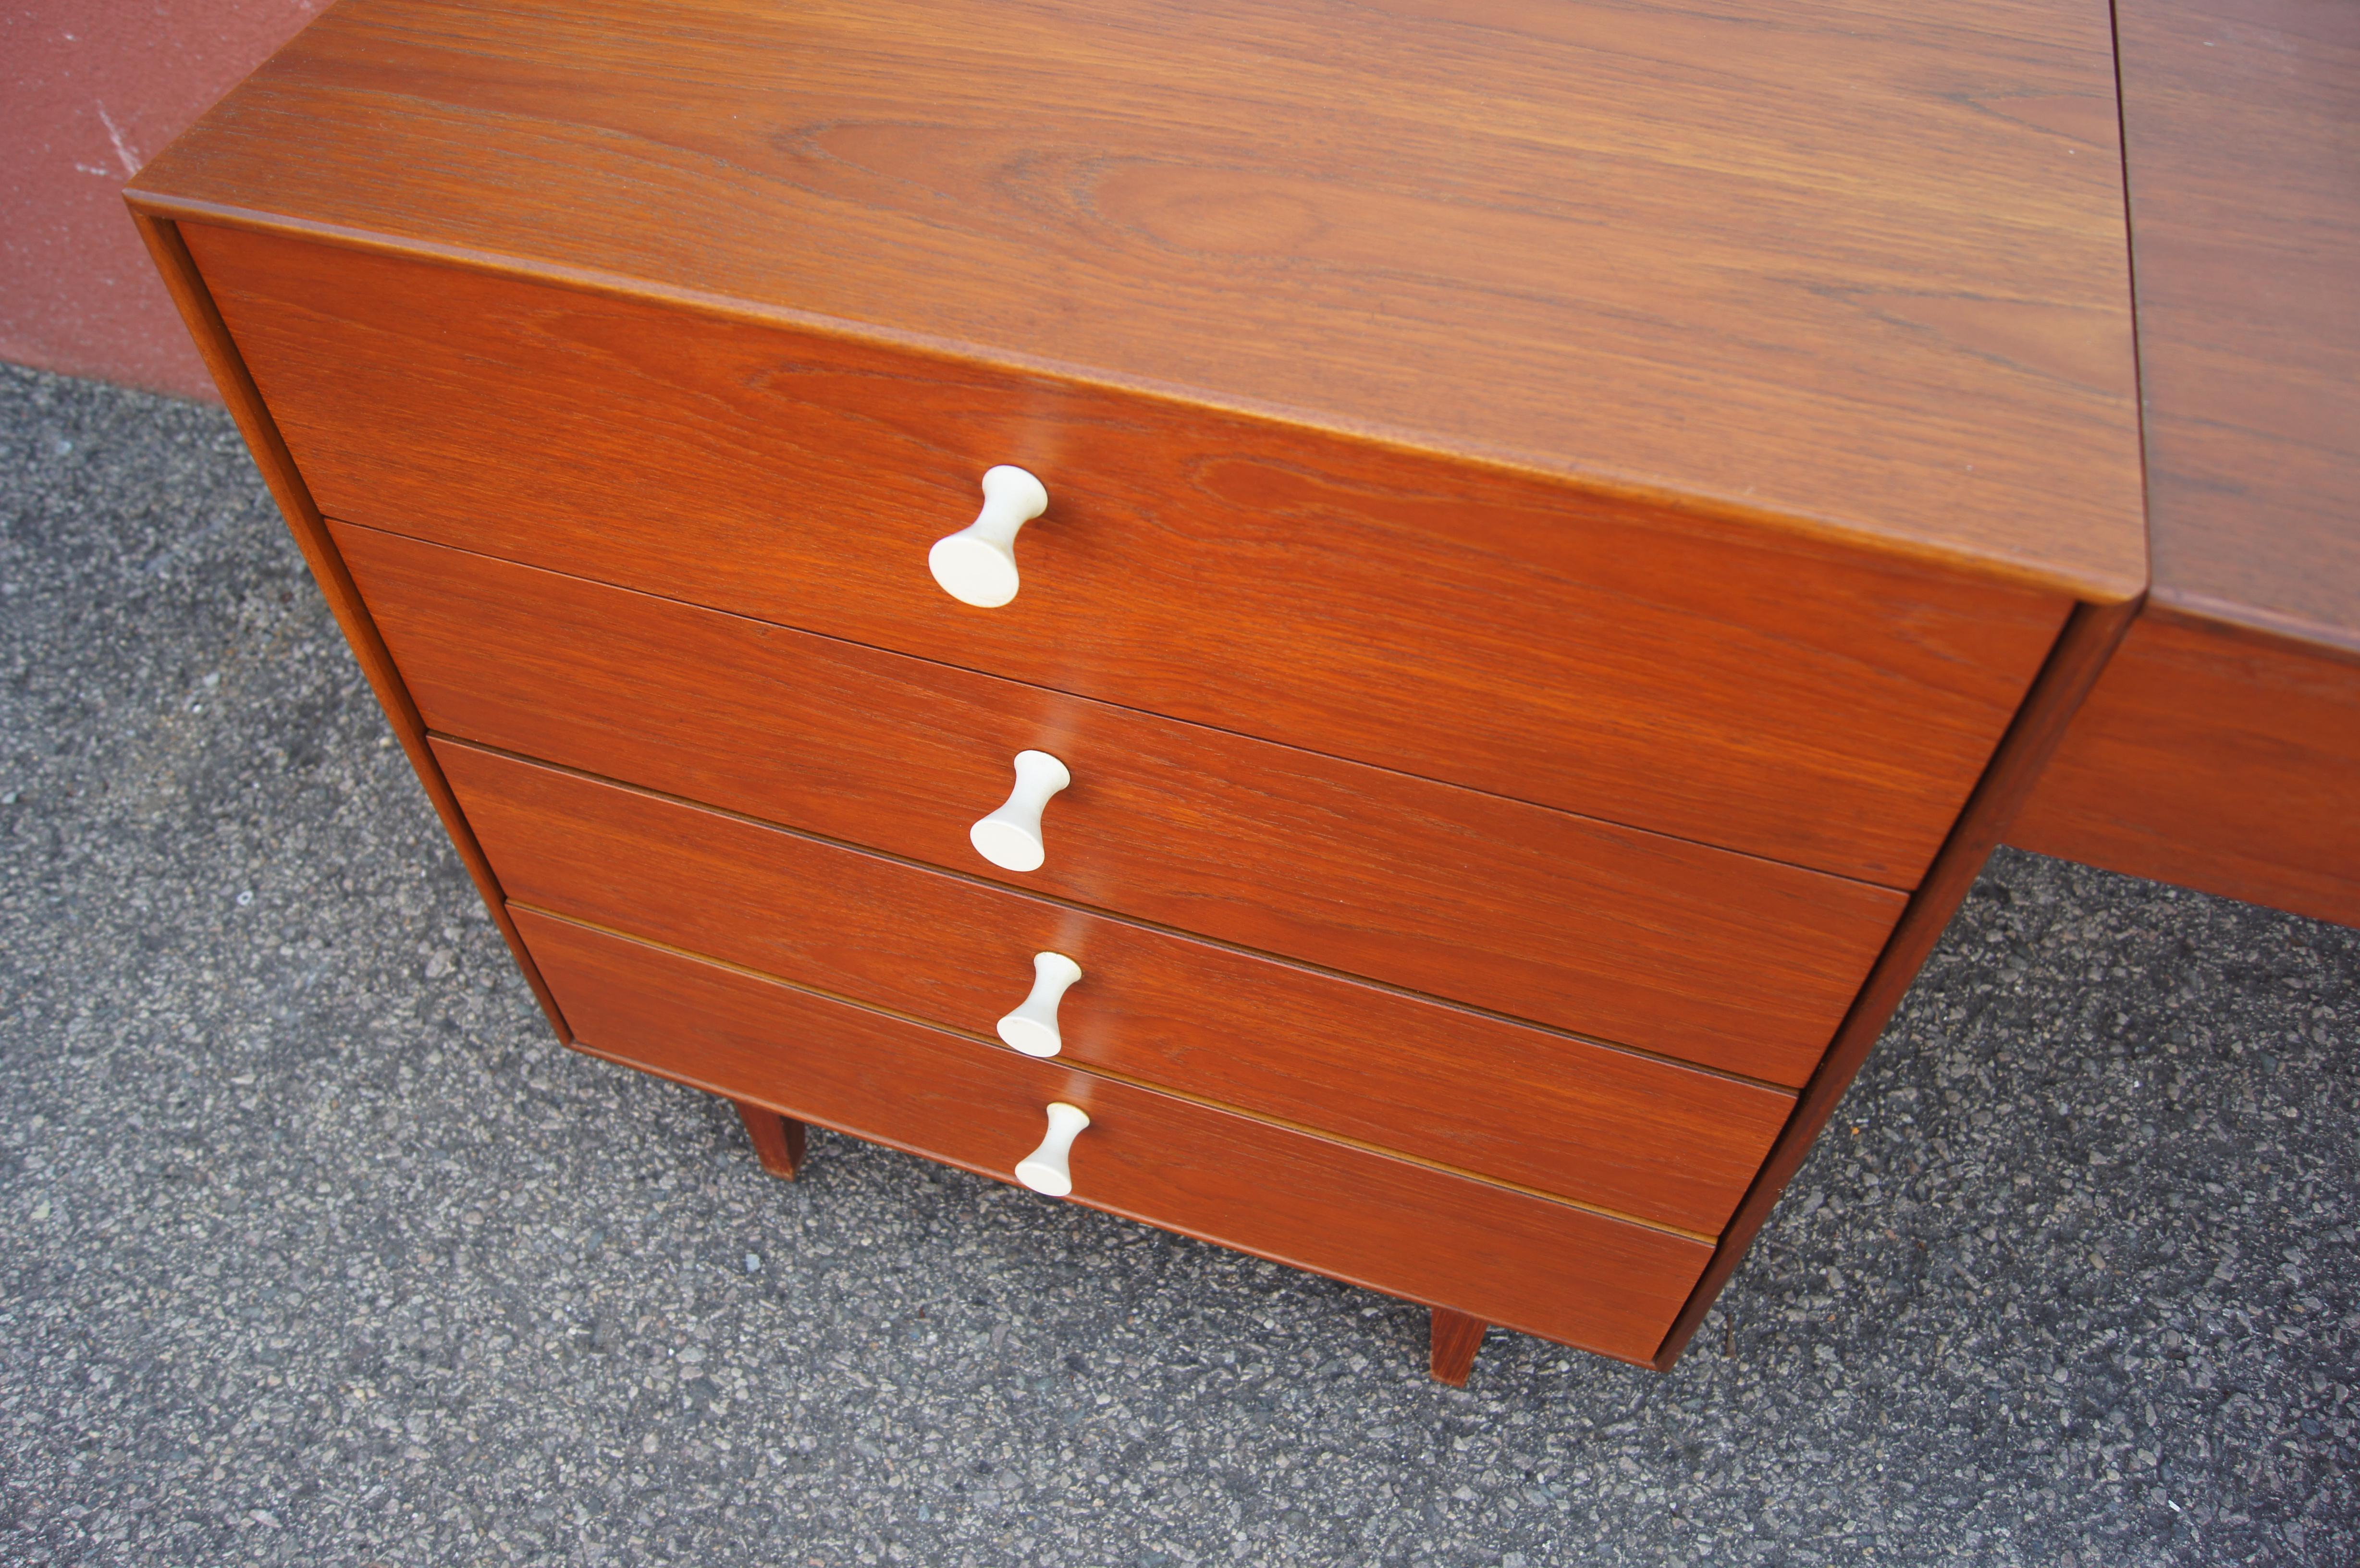 Part of the Thin Edge series that George Nelson designed for Herman Miller in the 1950s, this wonderful set comprises two dressers in a tawny walnut on either side of a suspended vanity.

The dresser to the left, model 4701, is 24 inches wide and